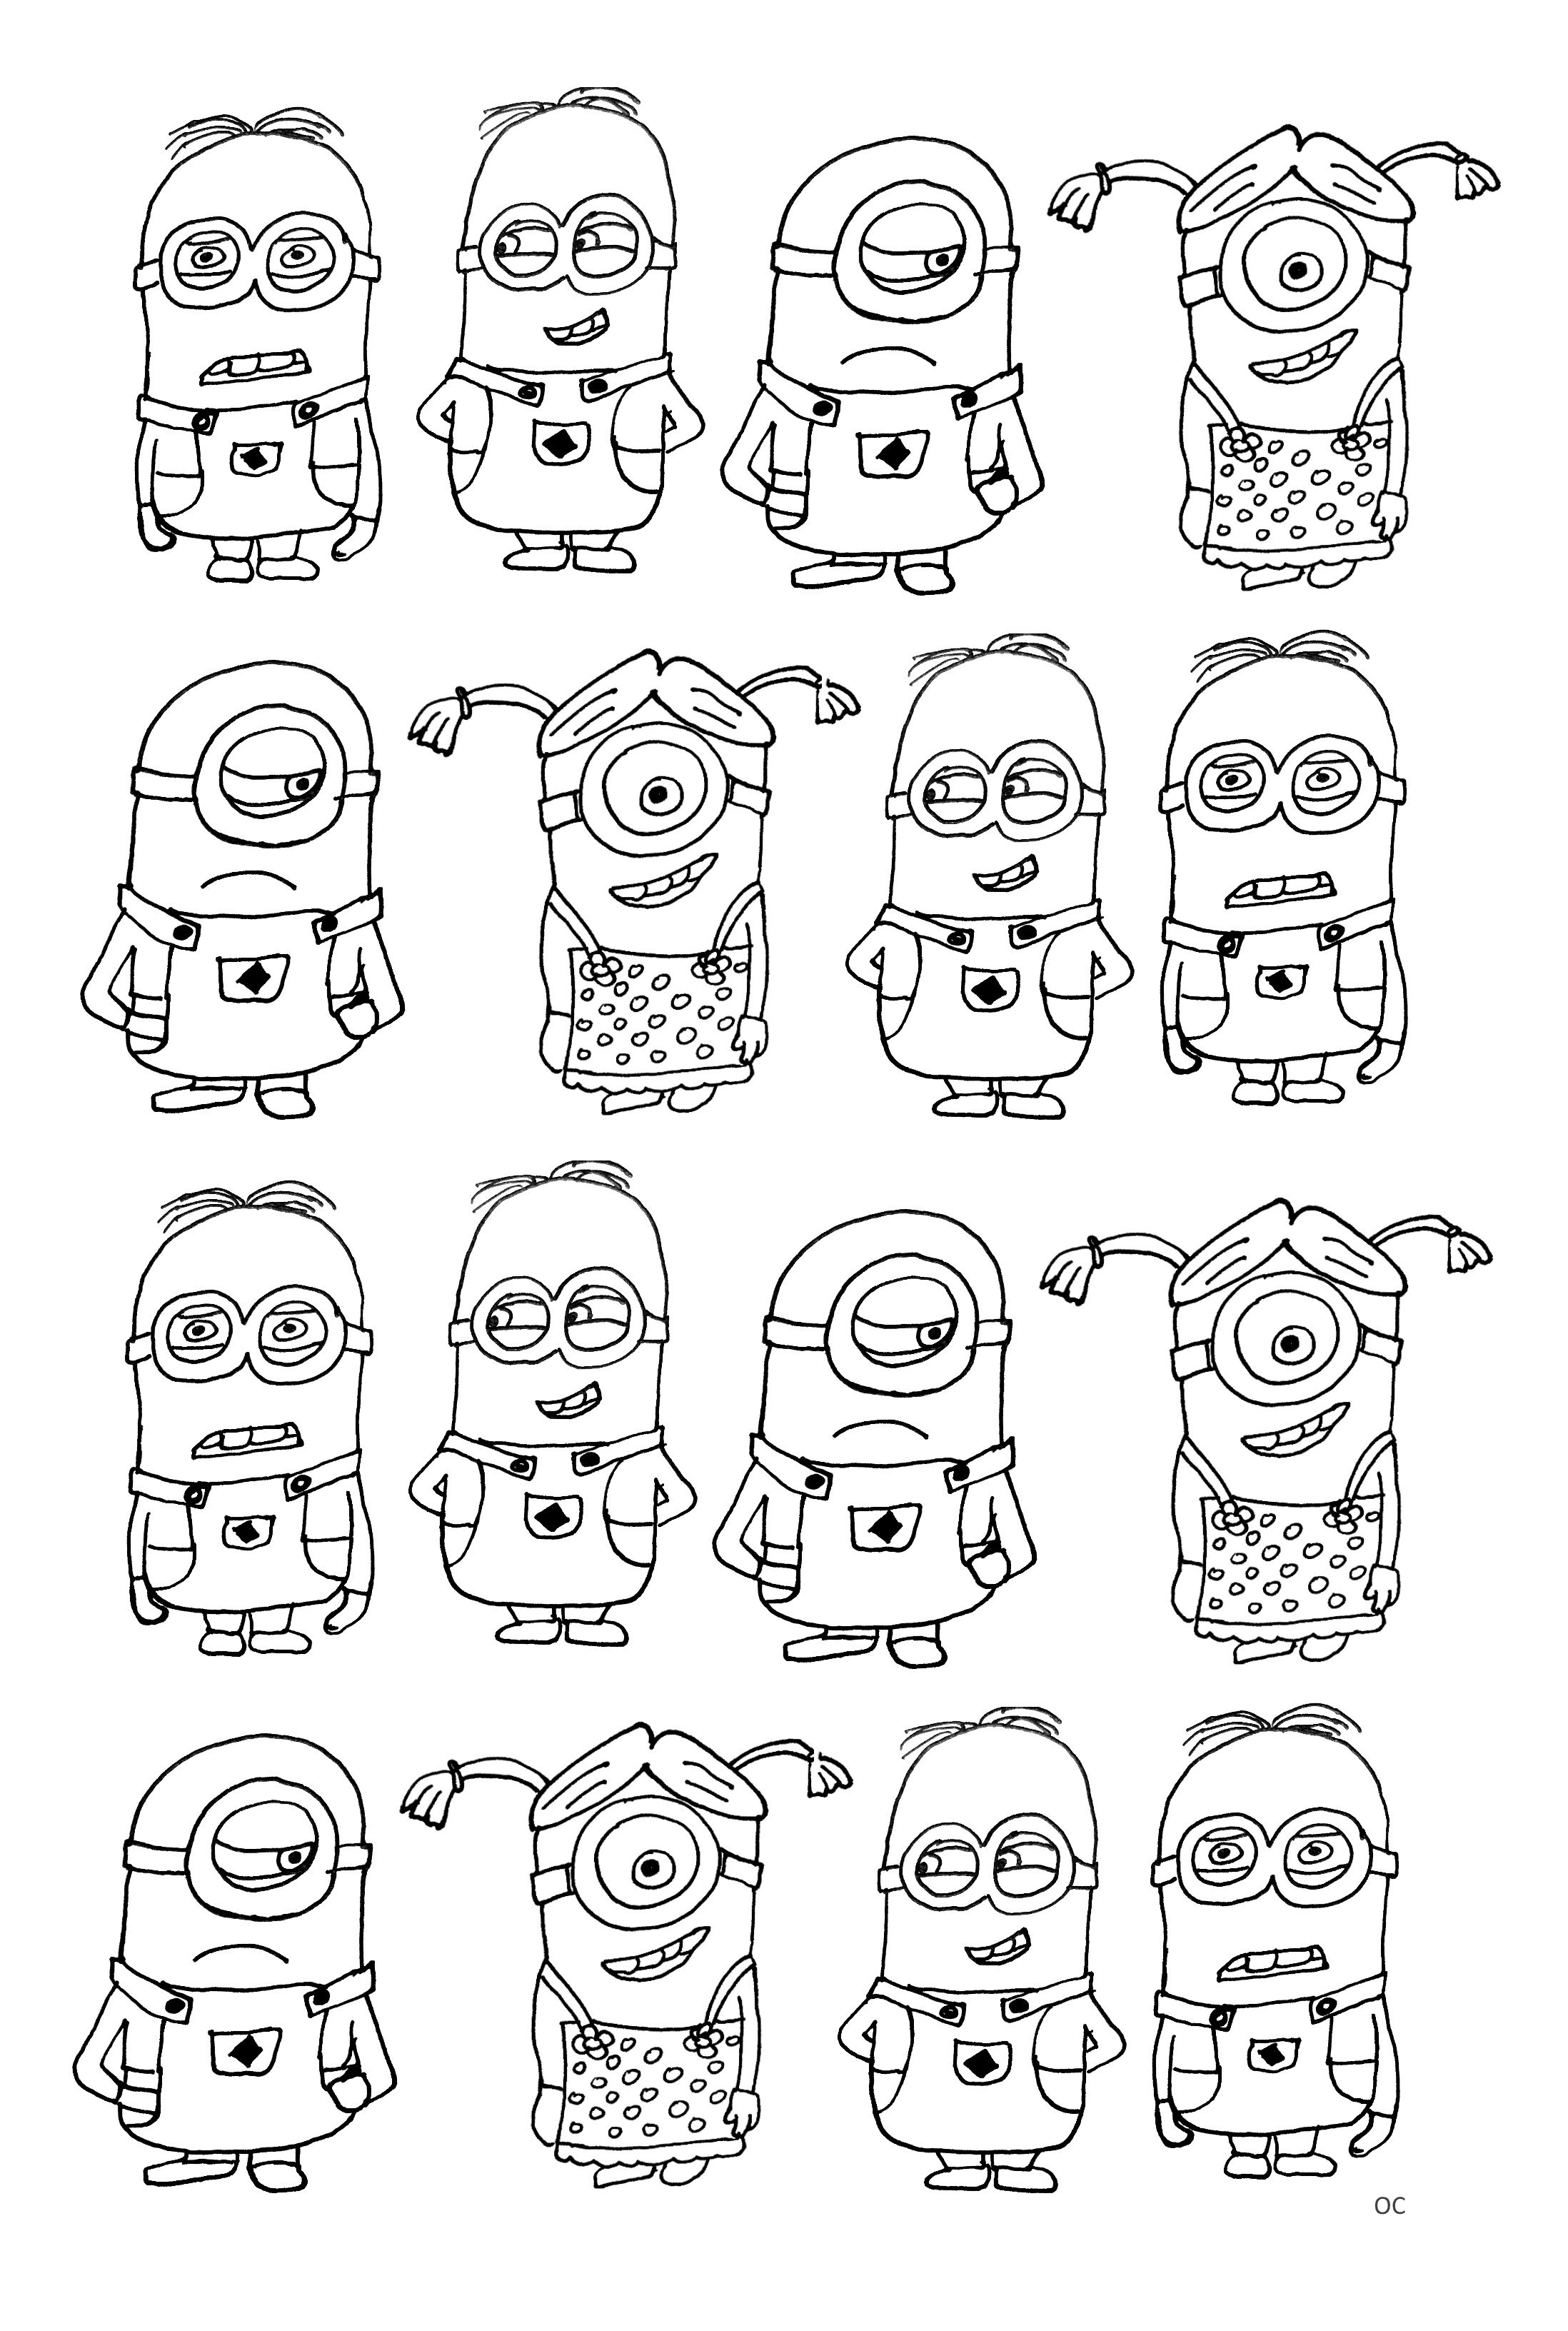 Numerous minions - Image with : Minions